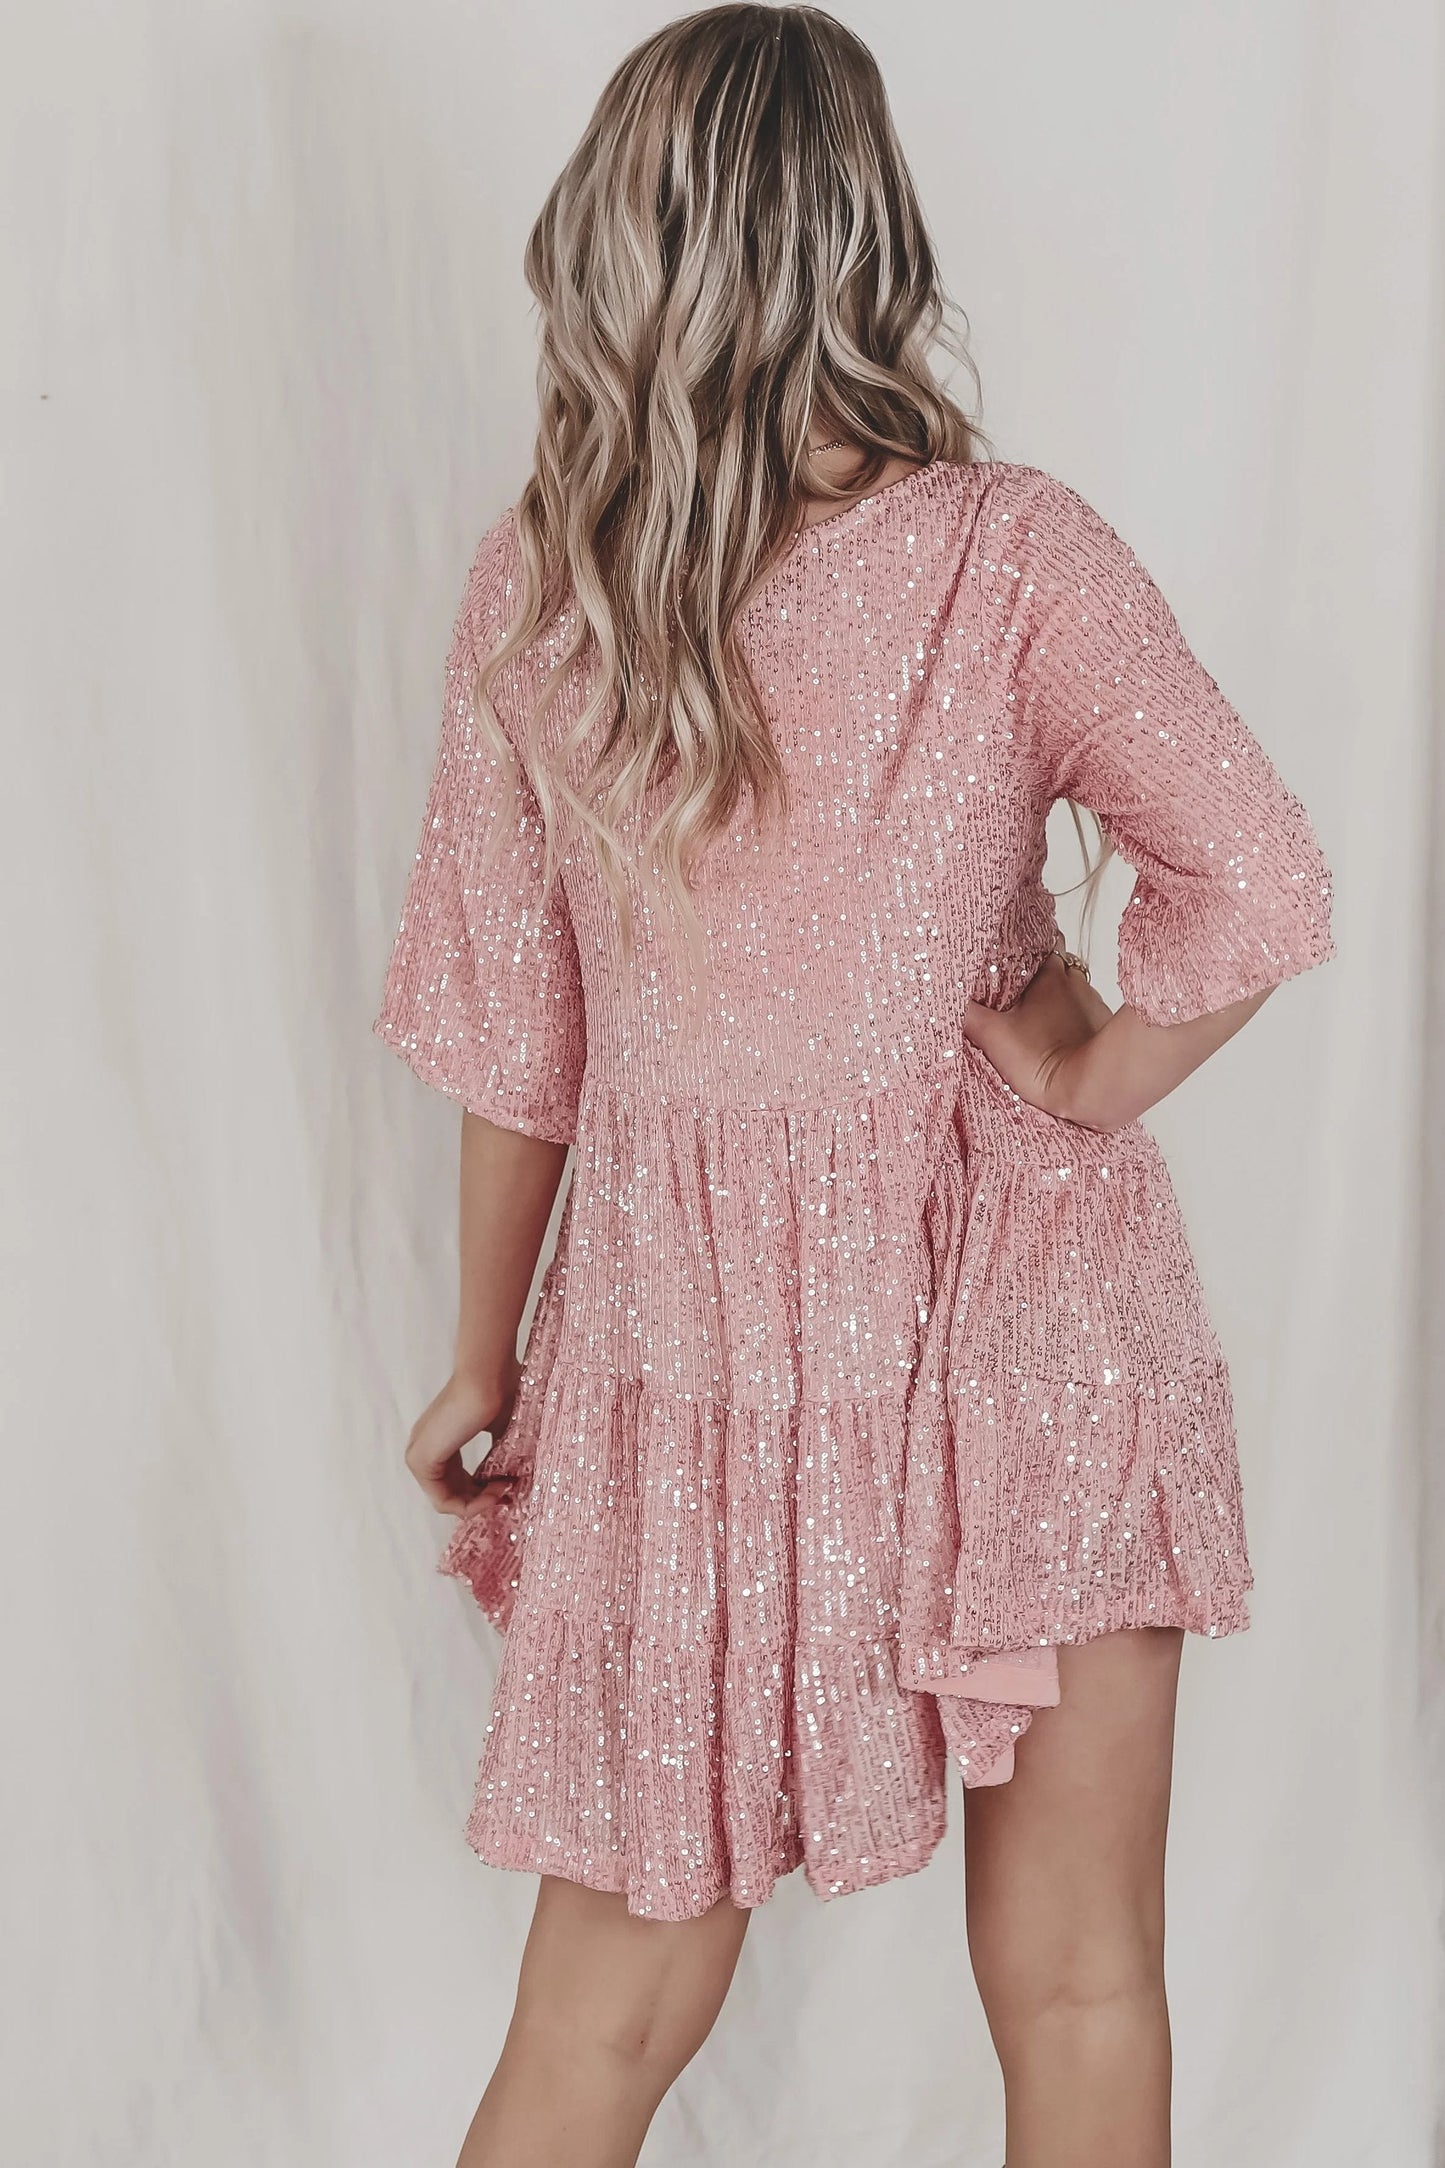 ✨2023 Sequin Baby Doll Dress